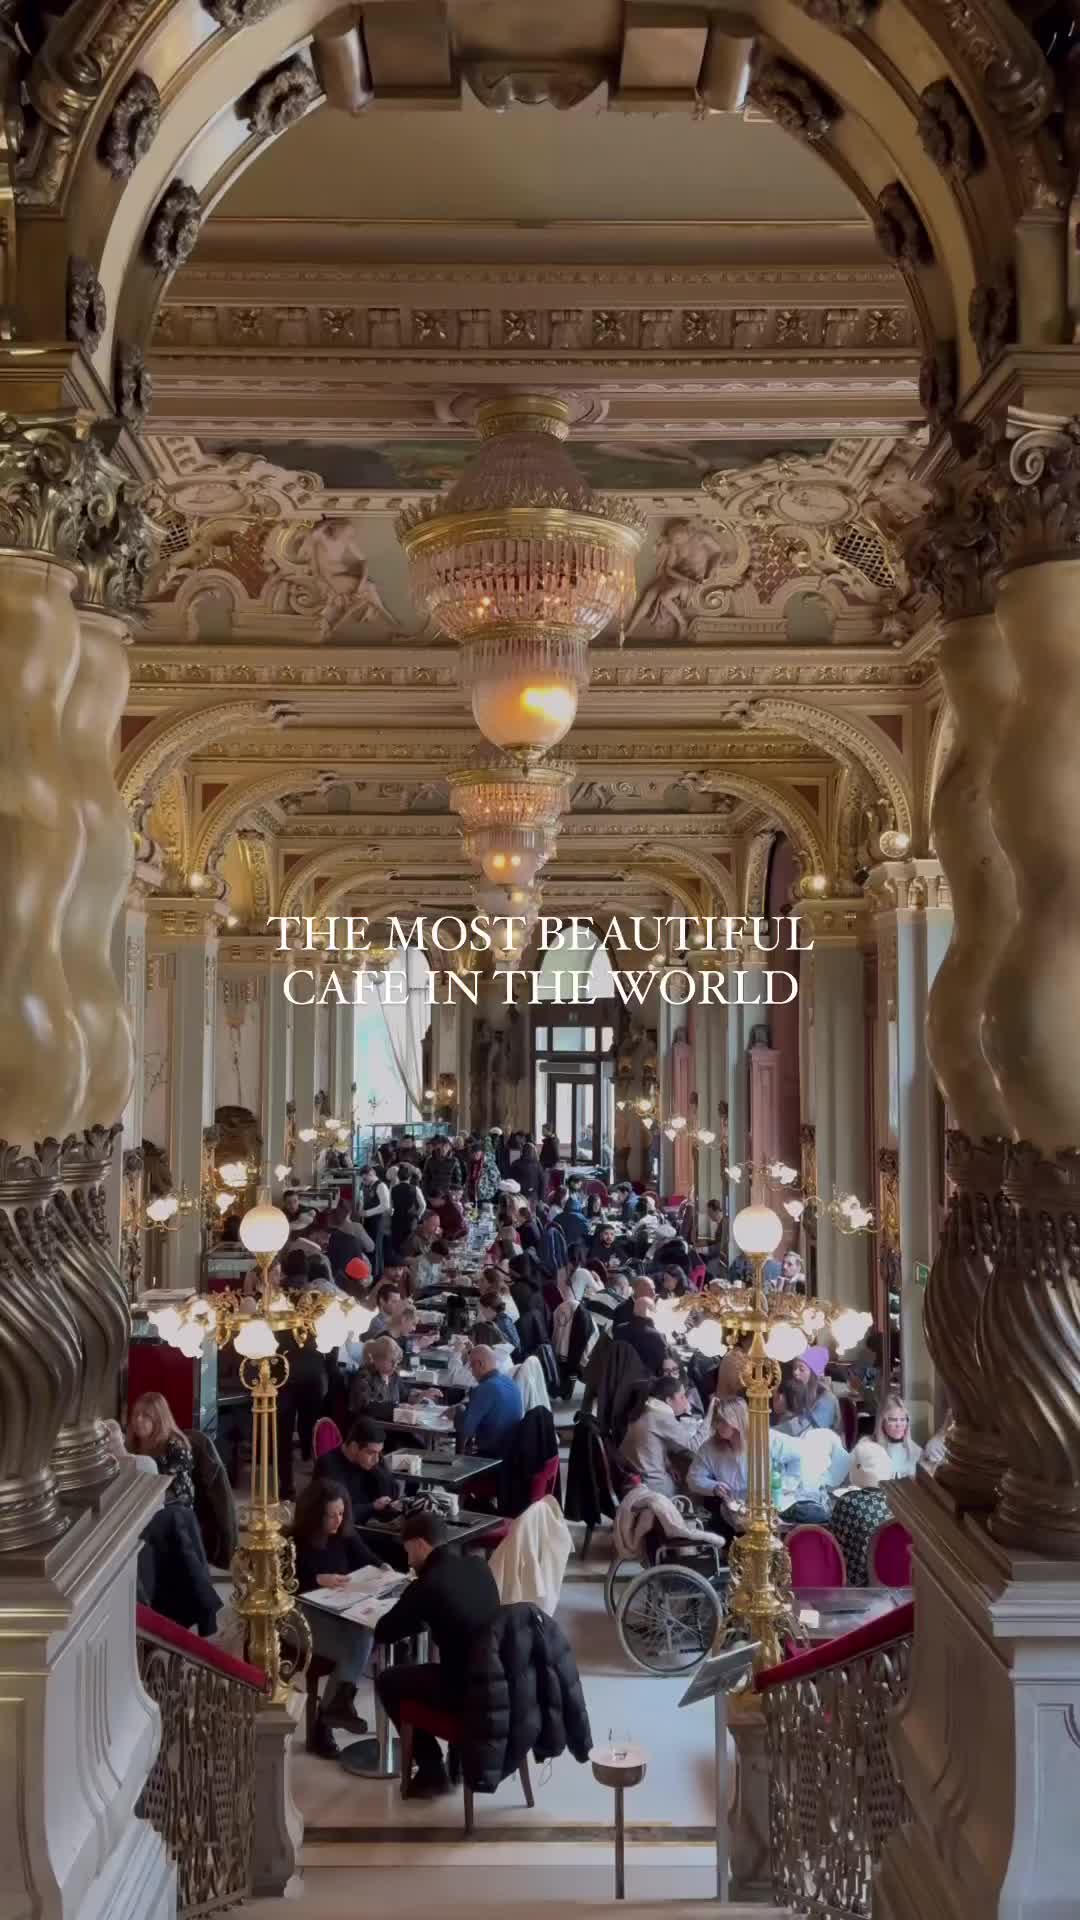 Discover the Most Beautiful Cafe in Budapest